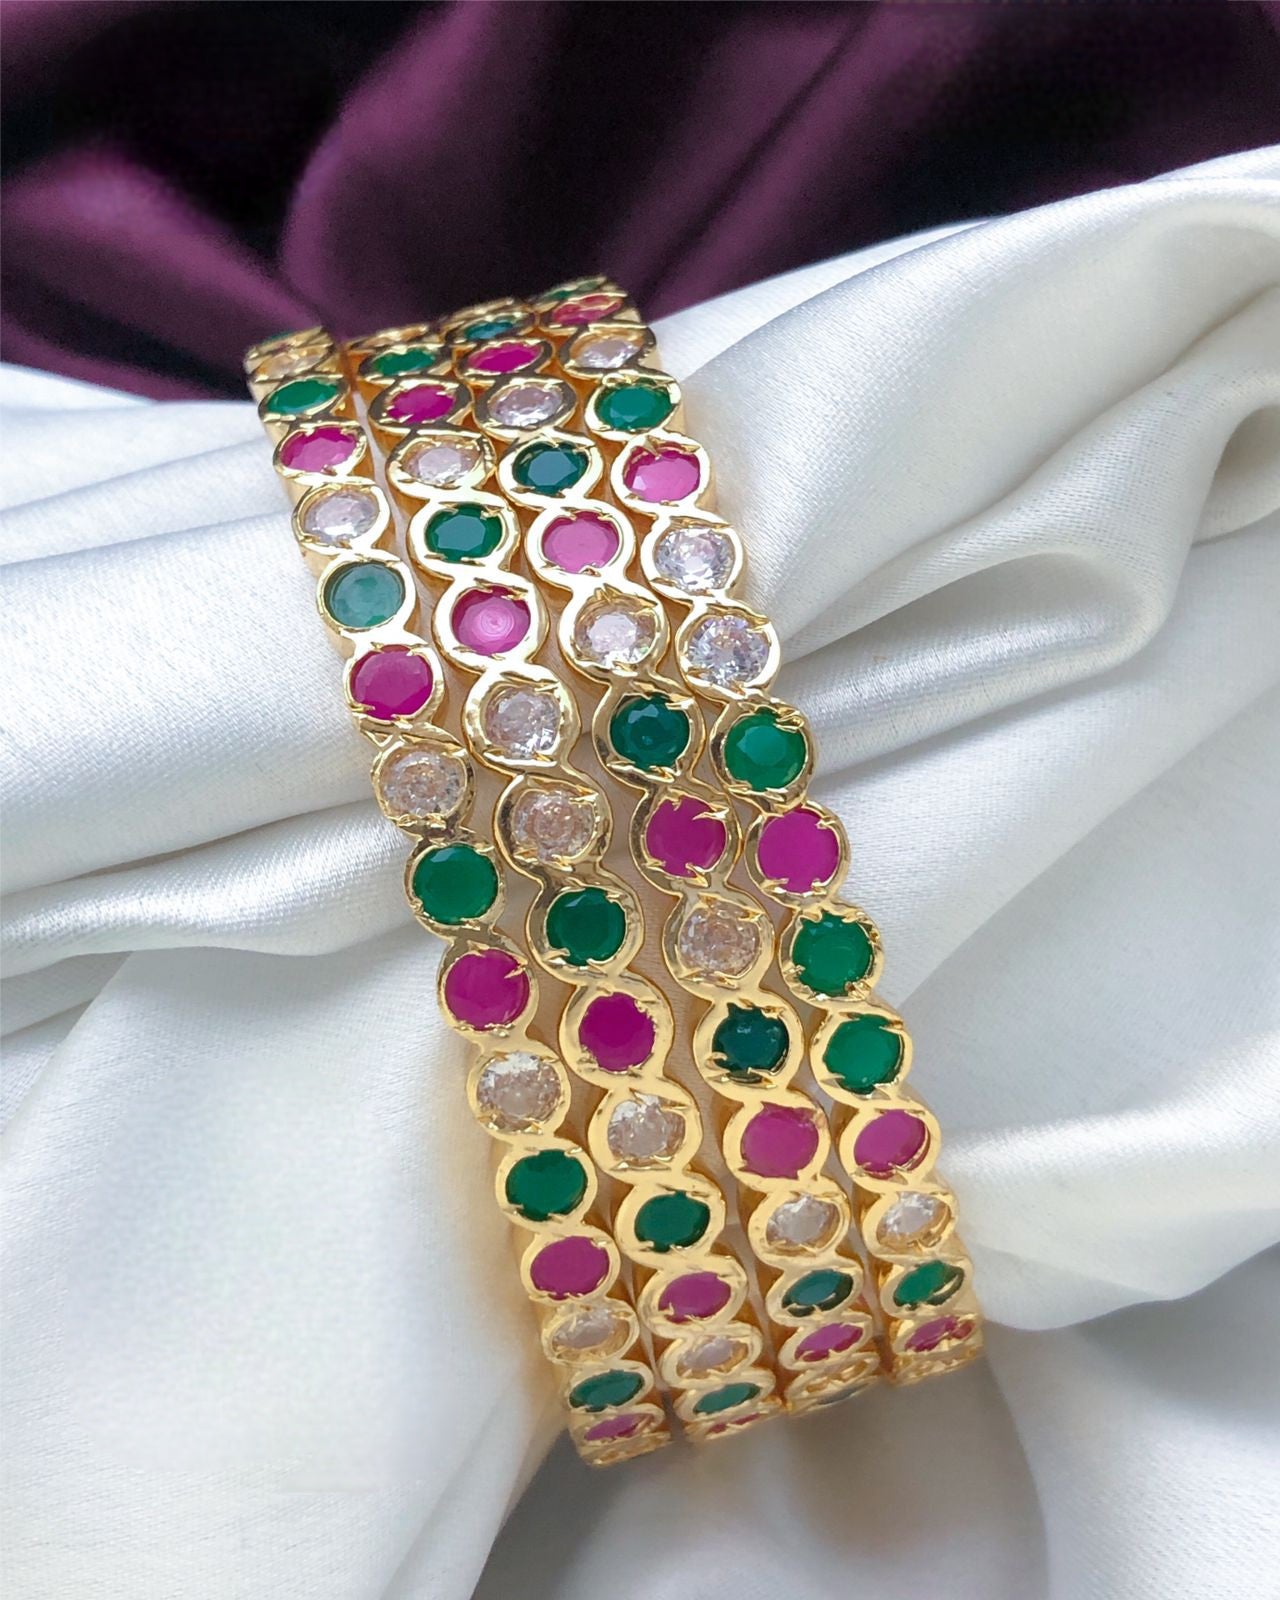 One Gram Gold Plated Bridal bangles 4-Piece, CZ American Diamond Ruby, emerald and white Stones, South Indian Bangles